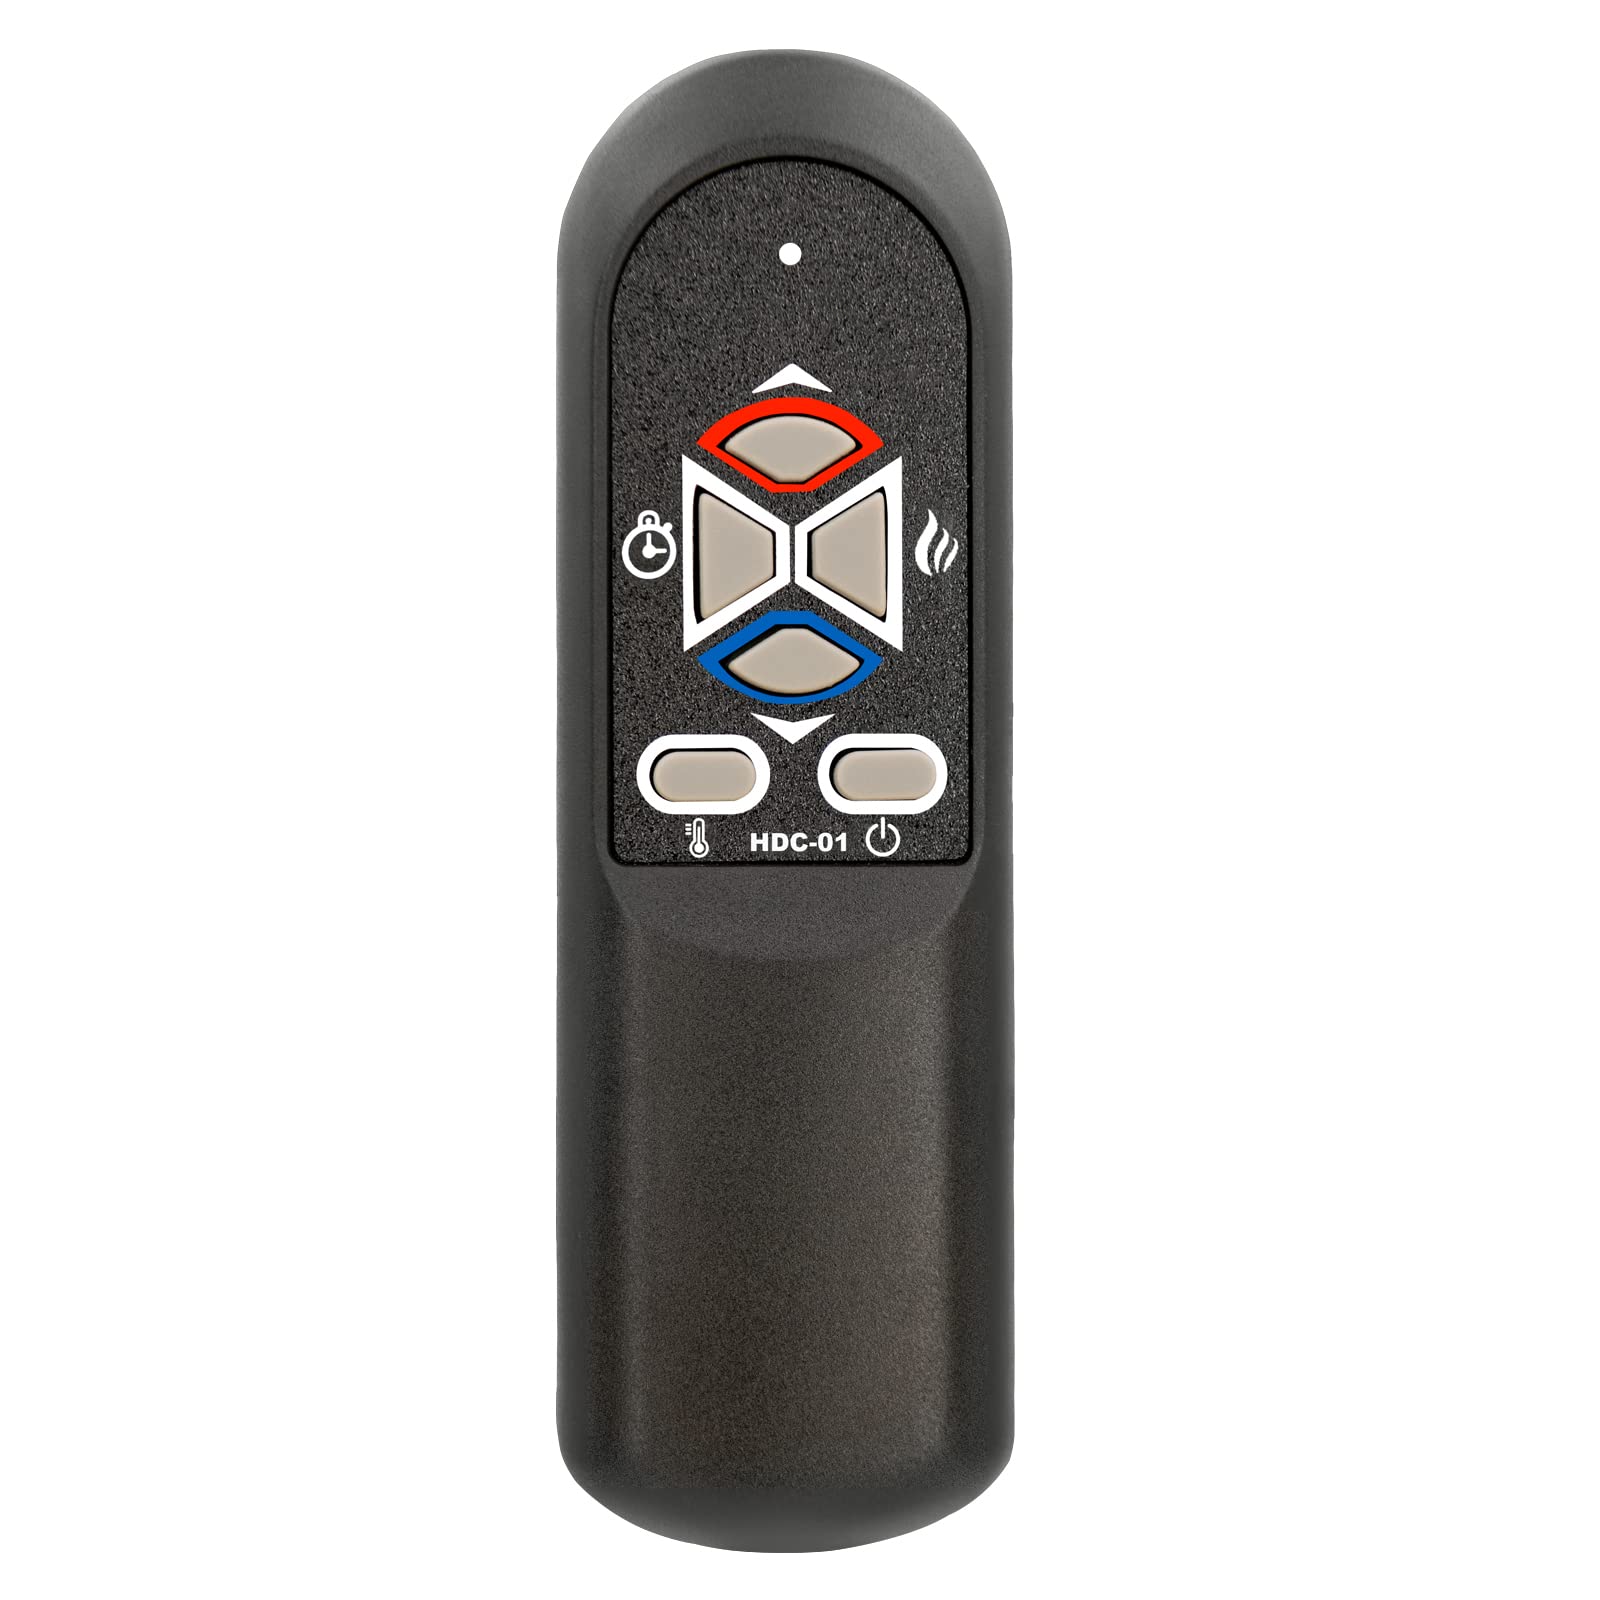 GENGQIANSI Replacement for Home Decorators Collection Electric Fireplace Heater Remote Control WH100-23I2D-R WH100-26I2D-R 205975812 WSFP59ECHD-1 207000440 207000474 207000442 1001803998